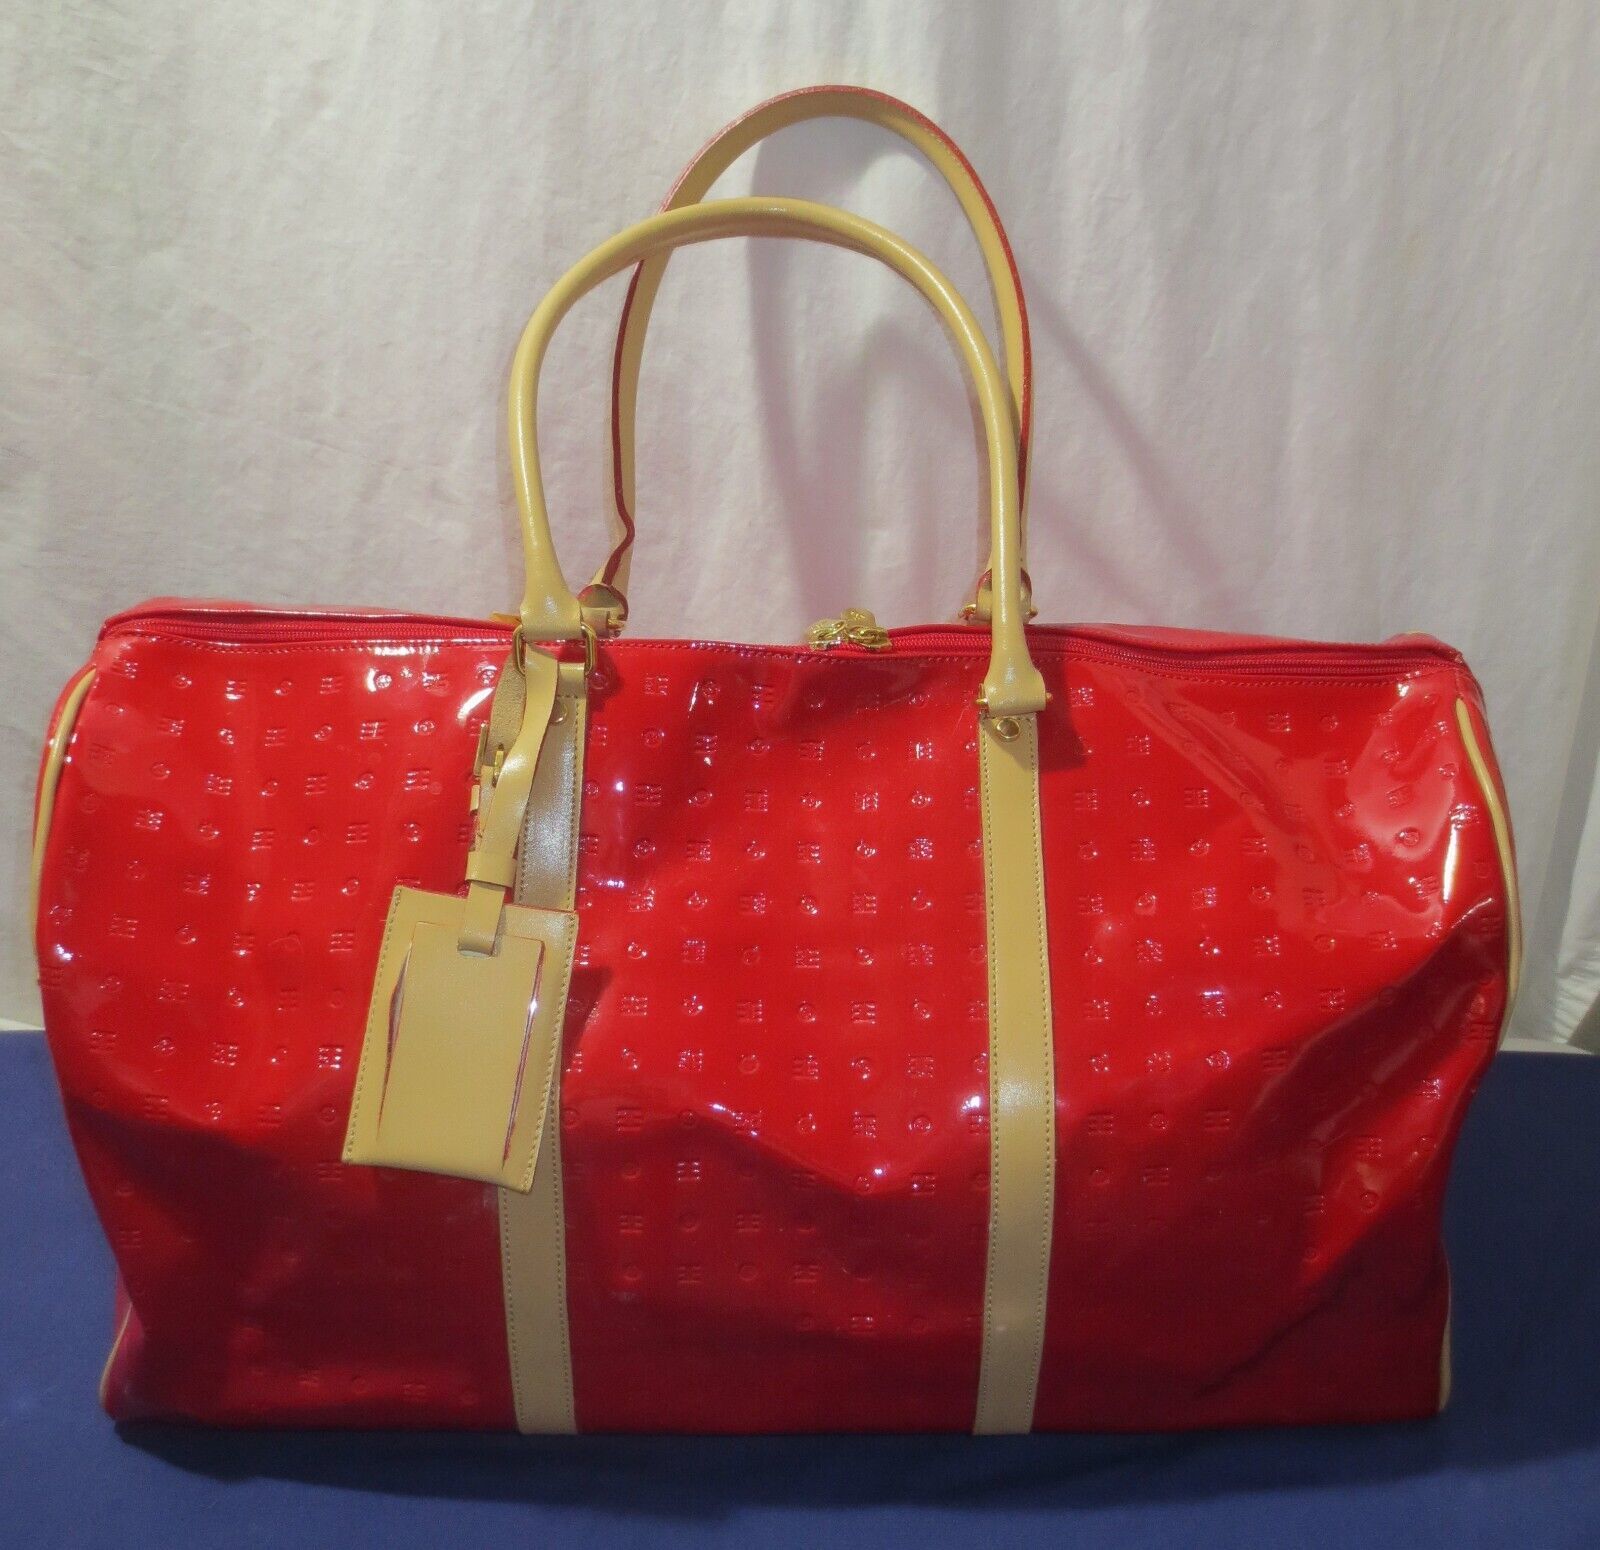 Primary image for Arcadia 100% Genuine Patent Leather LARGE Weekender Duffel Bag RED